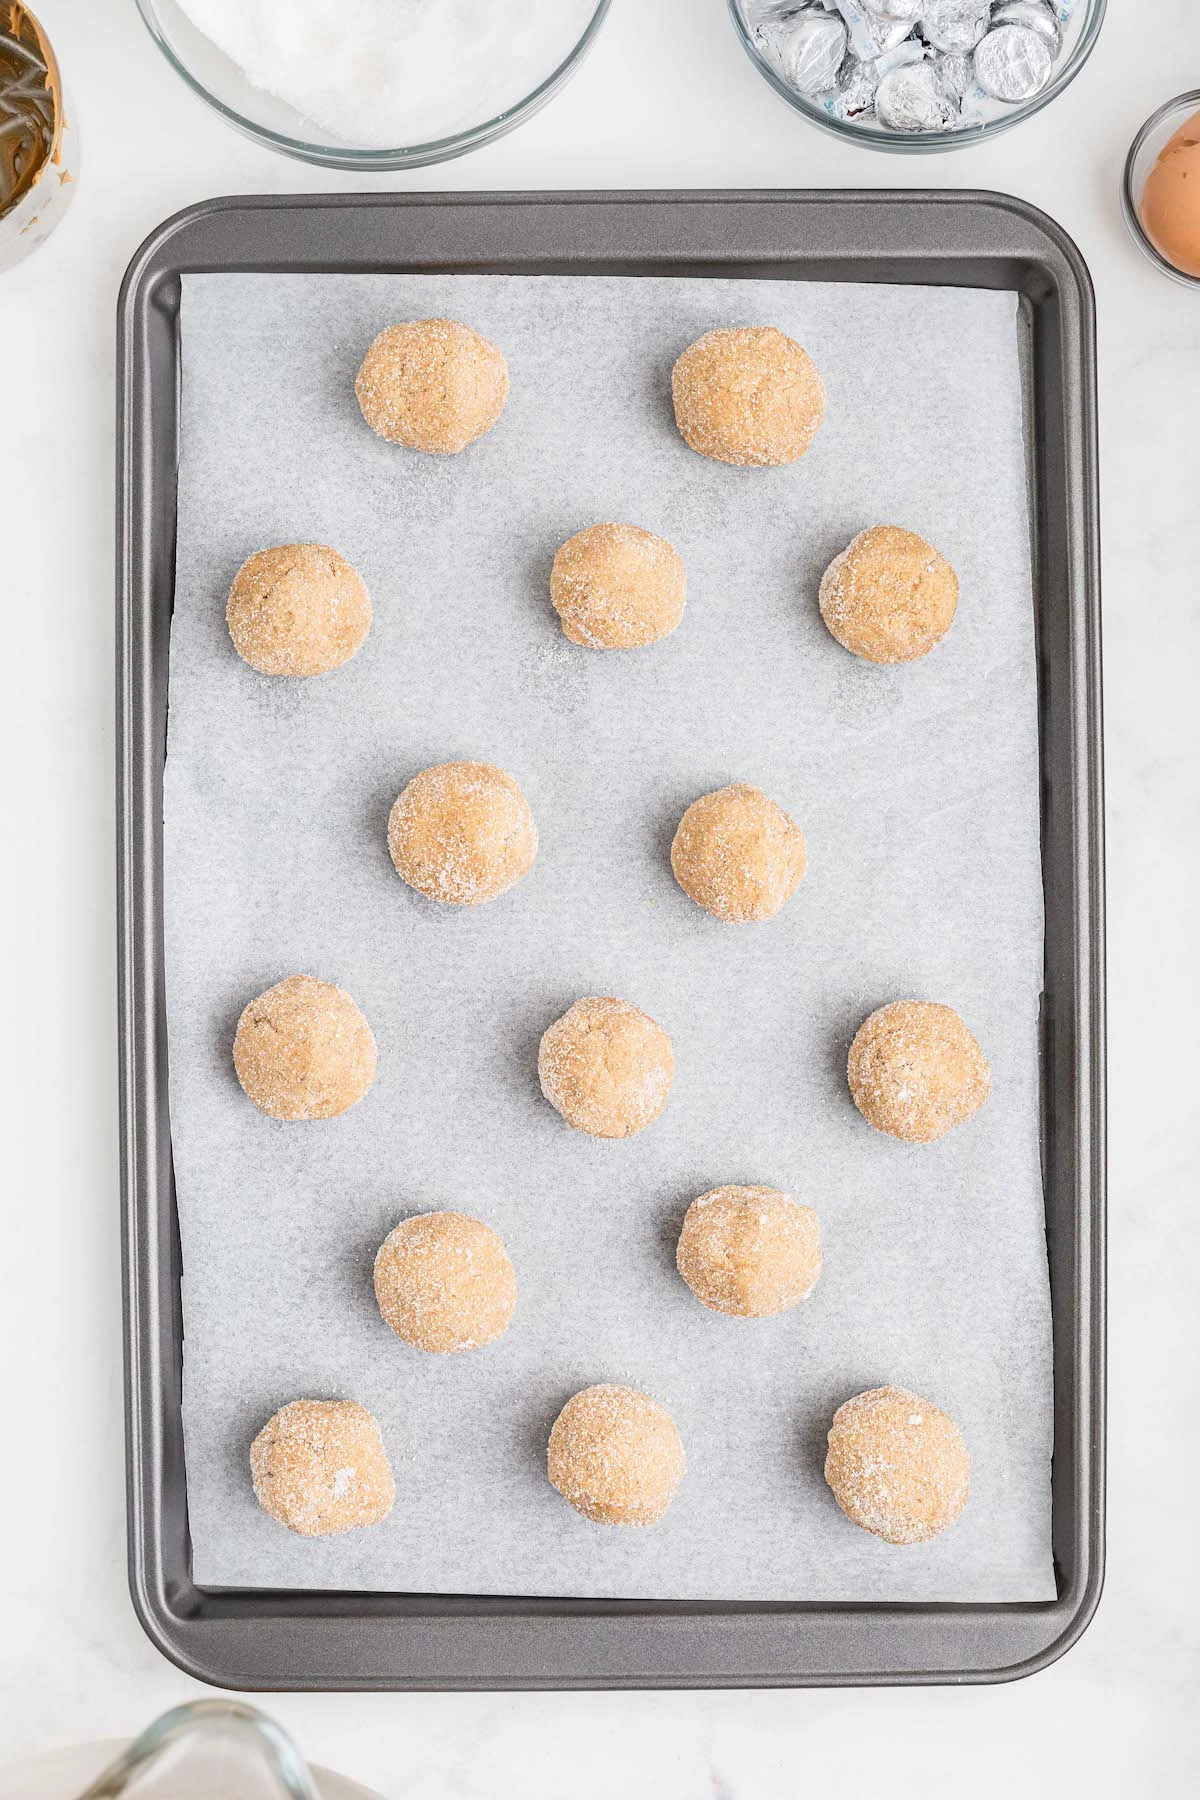 peanut butter dough balls ready to go into the oven